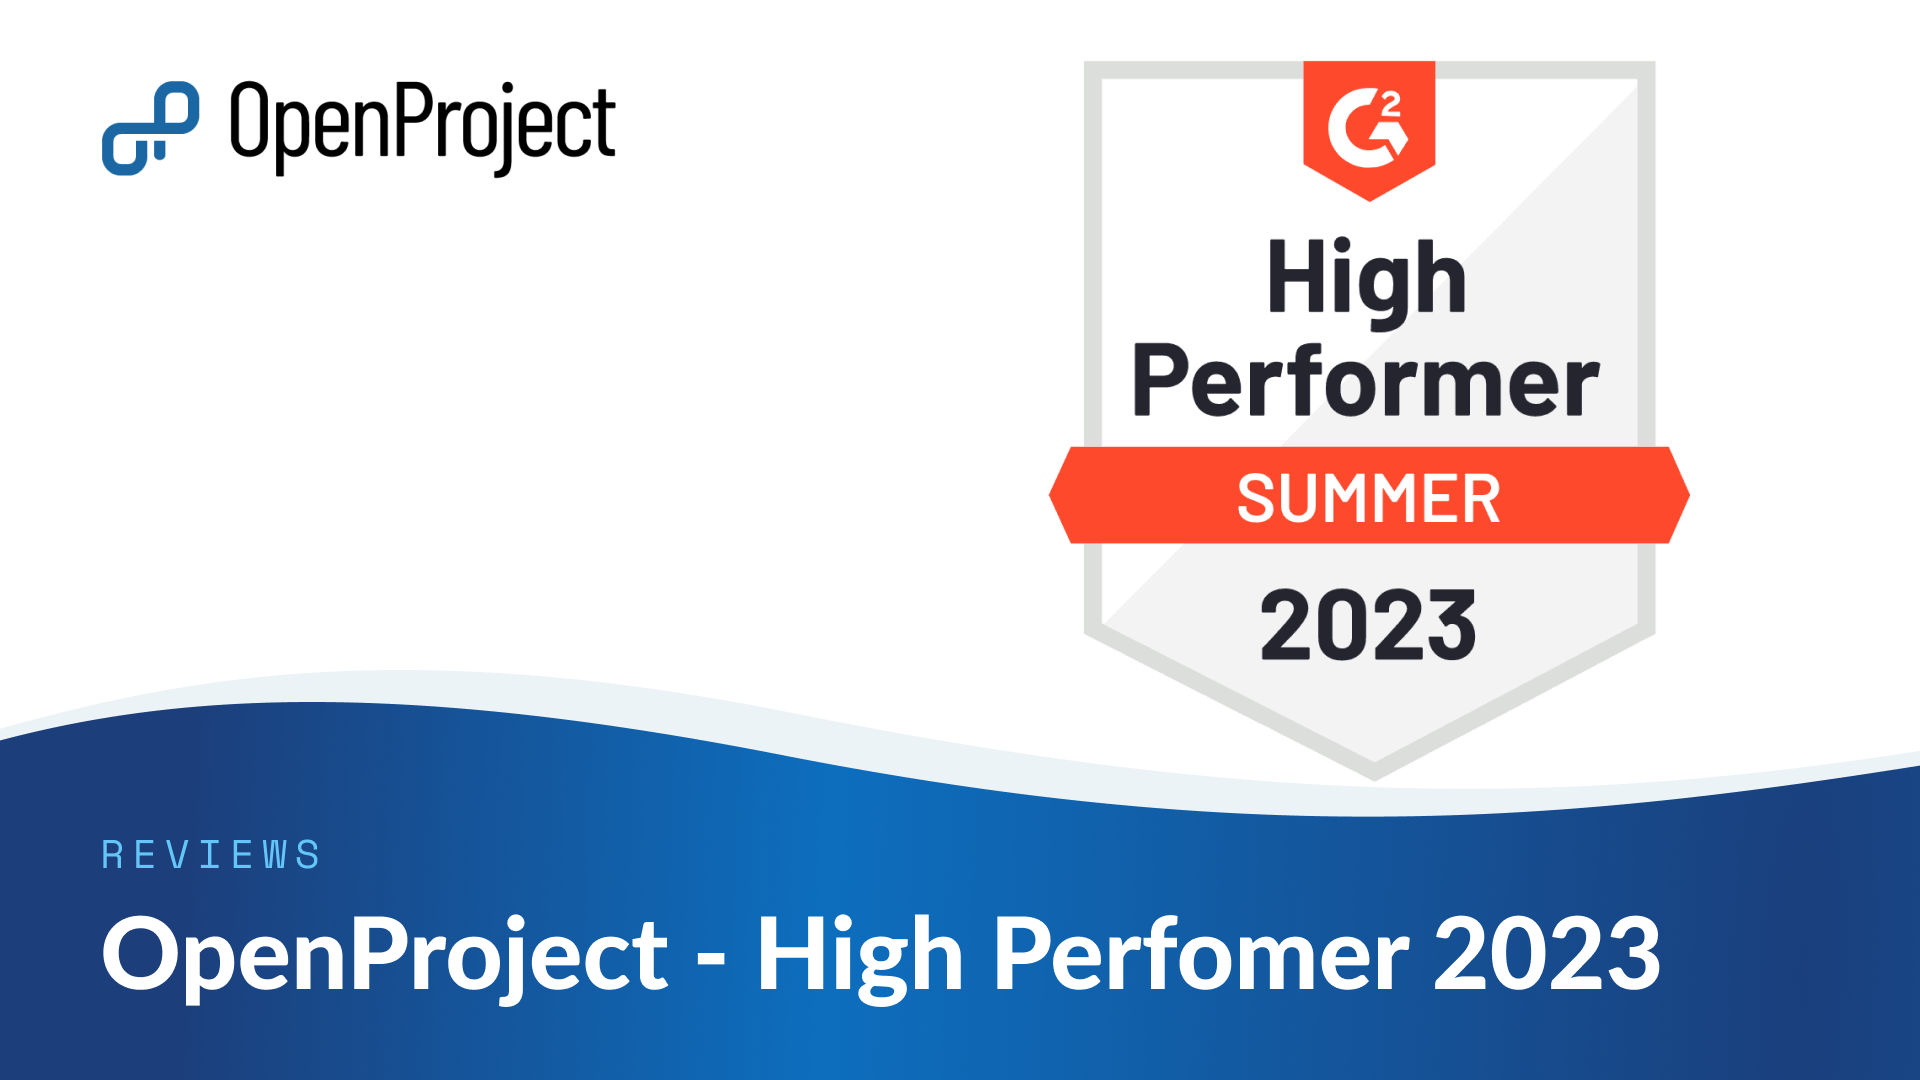 OpenProject recognized as high perfomer in 2023 by G2